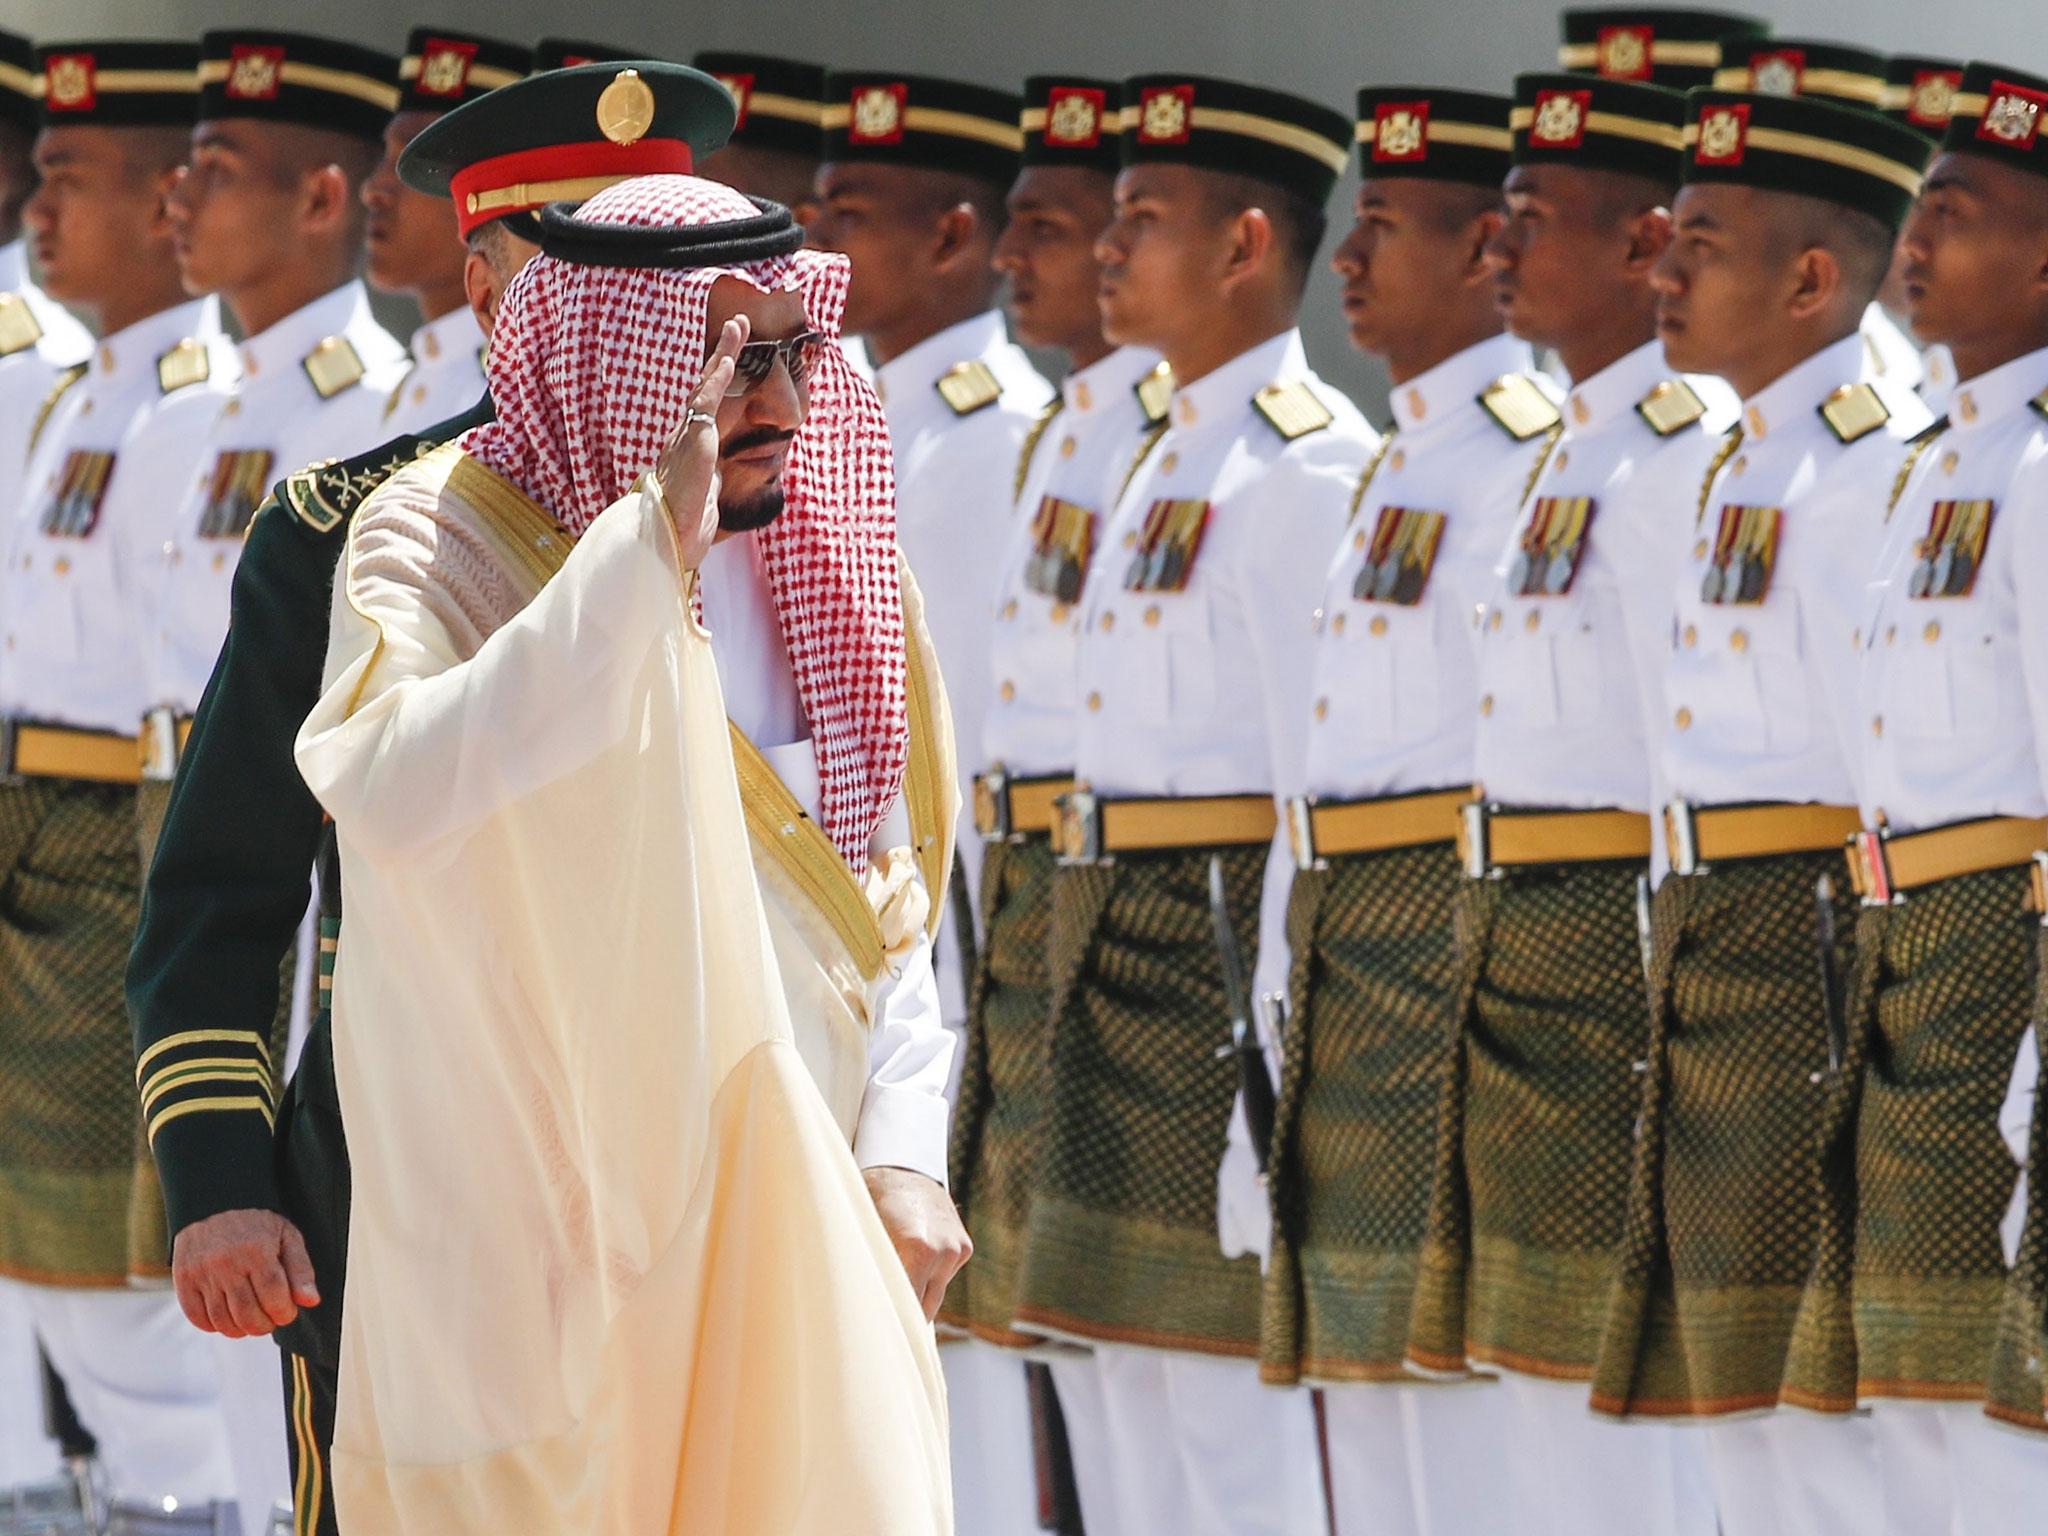 Saudi Arabia's King Salman bin Abdulaziz was on a four-day state visit to Malaysia, accompanied by a delegation of more than 600 people